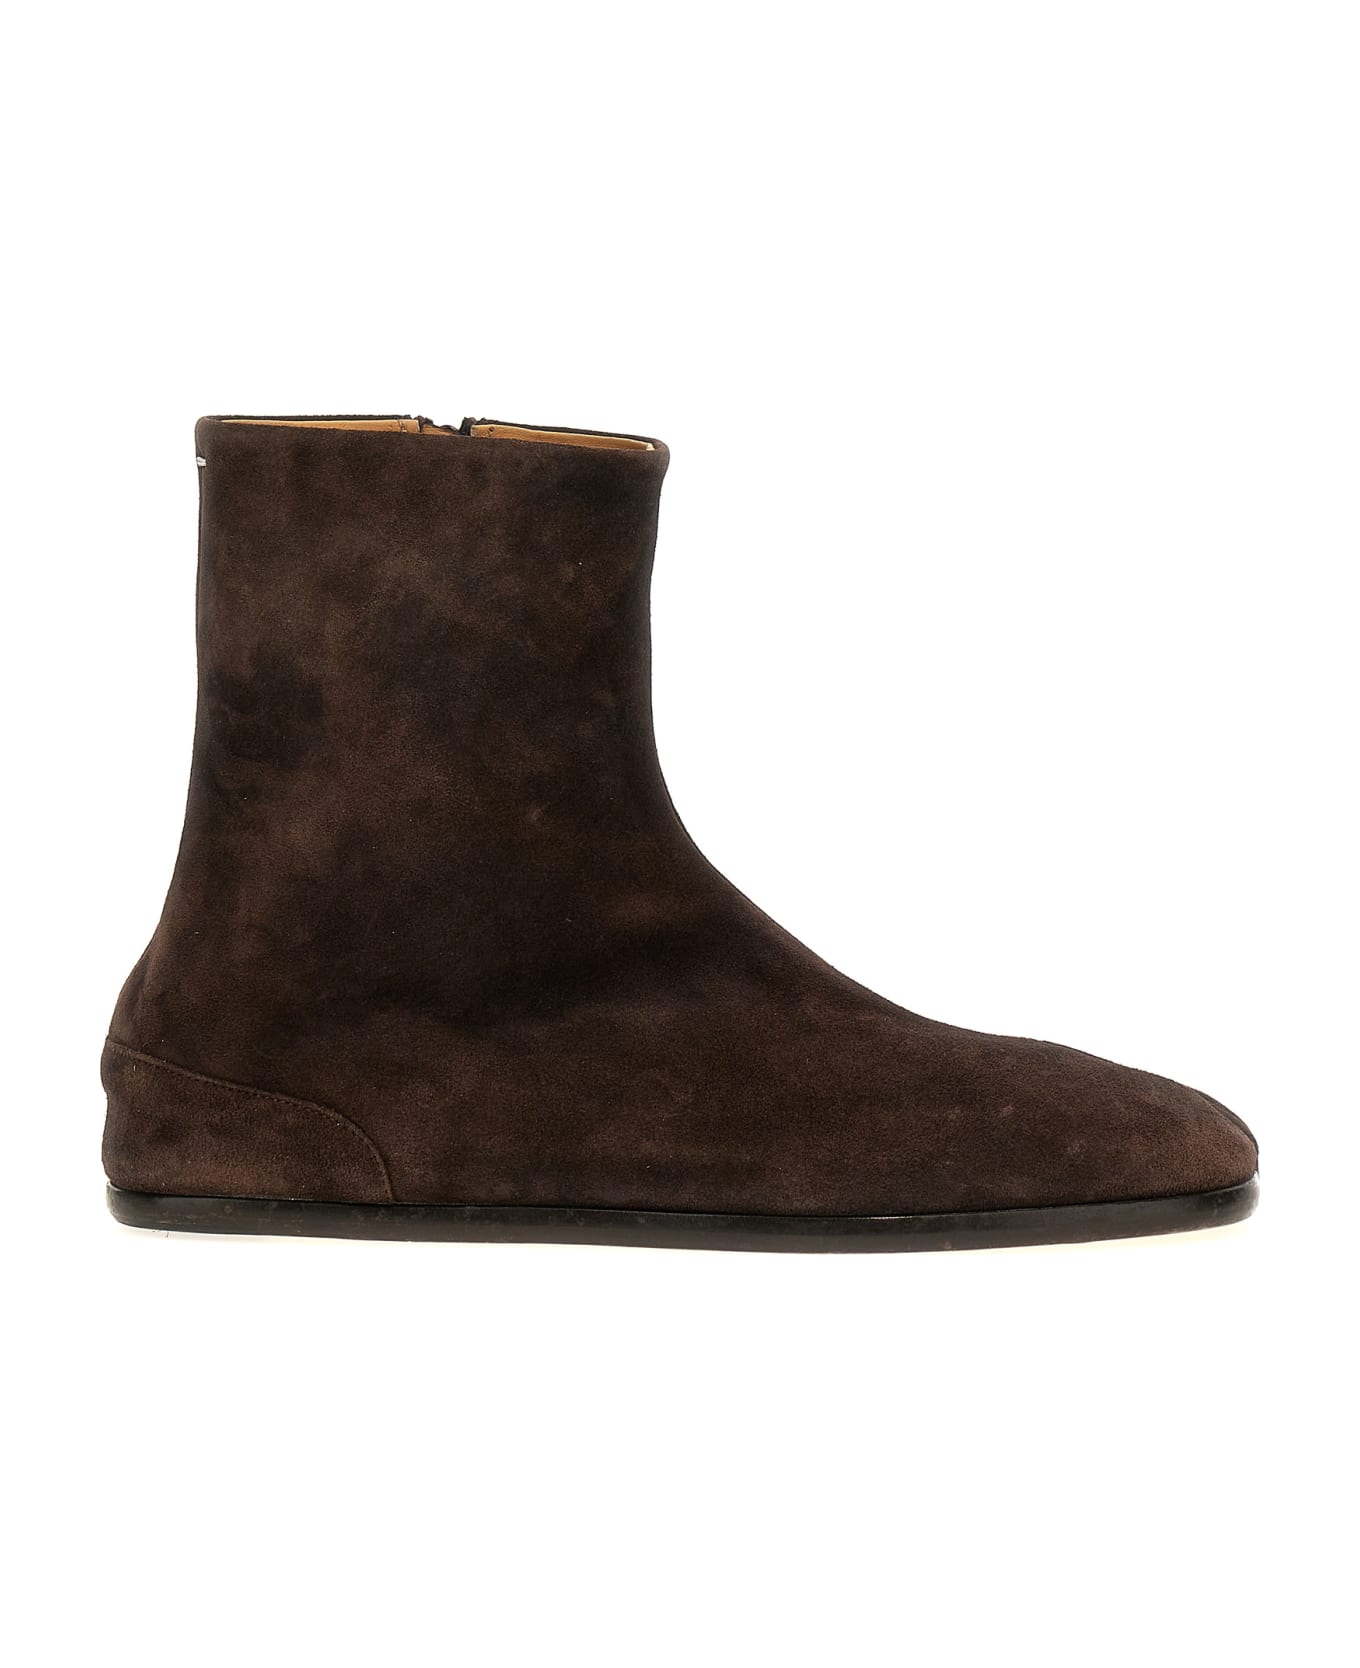 Maison Margiela 'tabi' Ankle Boots - Brown ブーツ